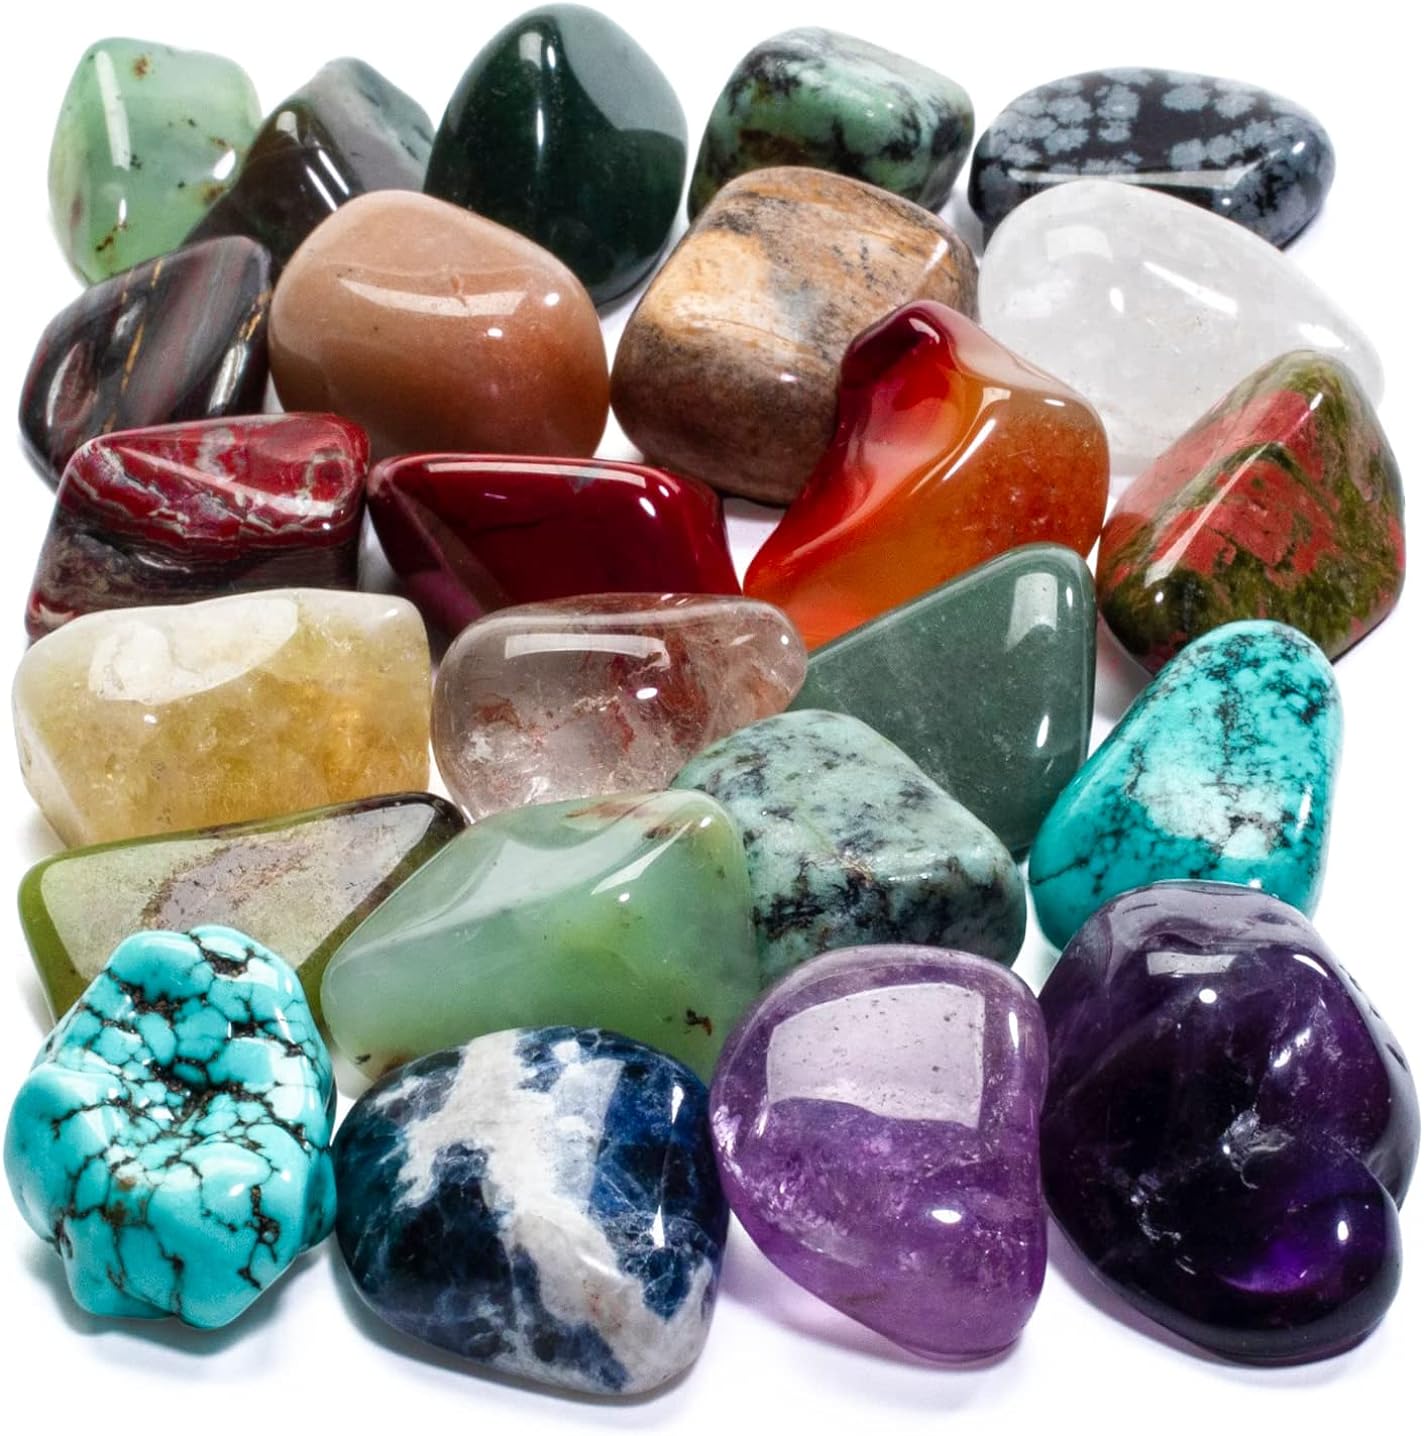 KALIFANO Bulk Tumbled Stones 1,000 Carats Random Assortment of Polished High Energy Reiki Crystals May Include Blackstone, Turquoise, Fluorite etc. - Piedras Caidas with Healing Properties